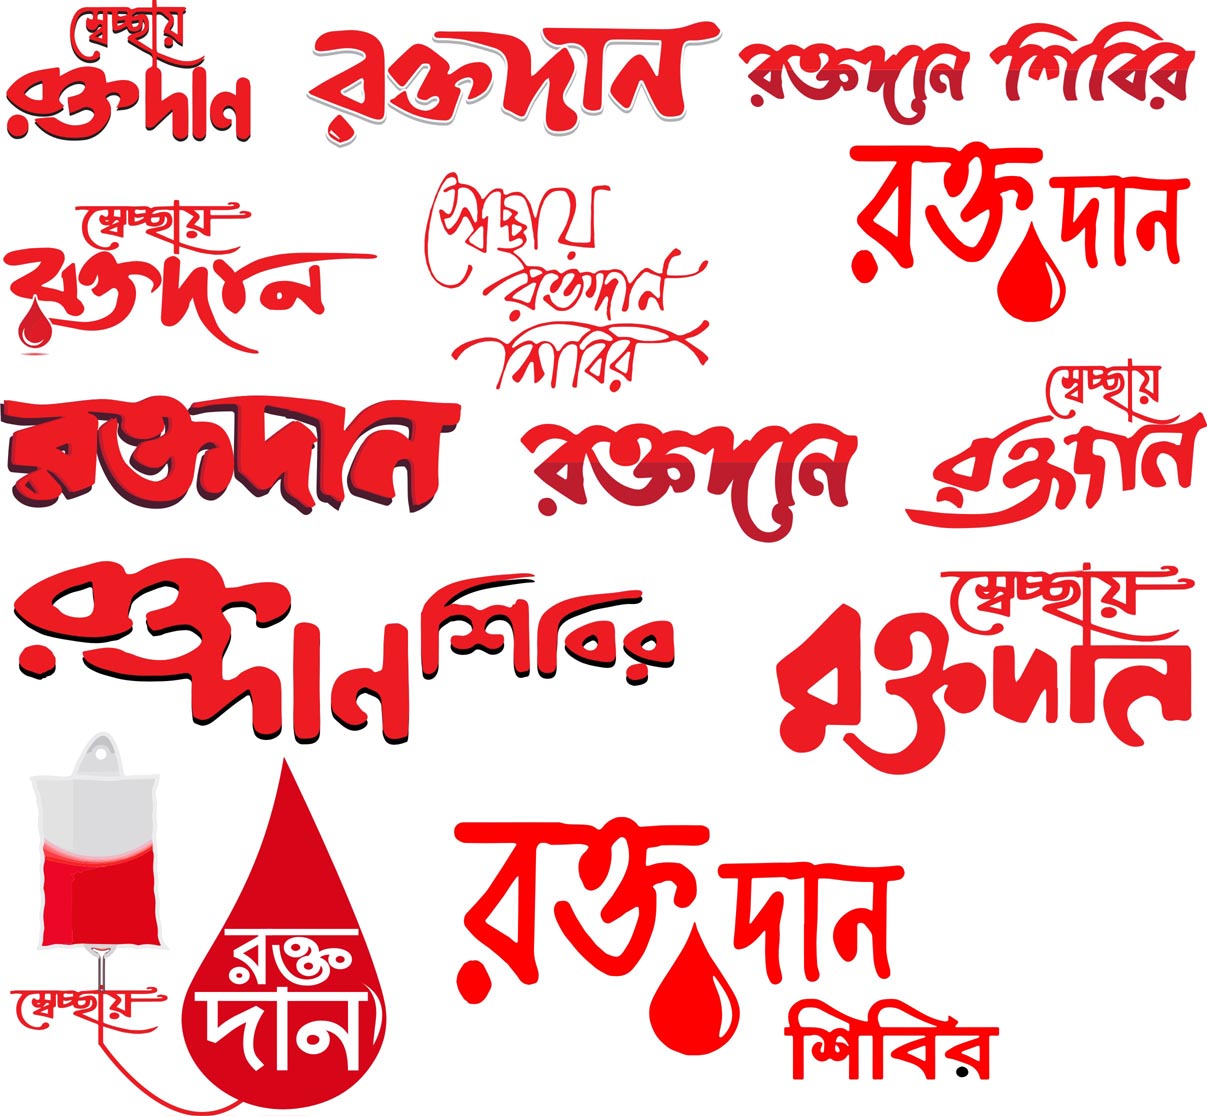 Blood Donation camp bengali typography cdr free download - Artzstar